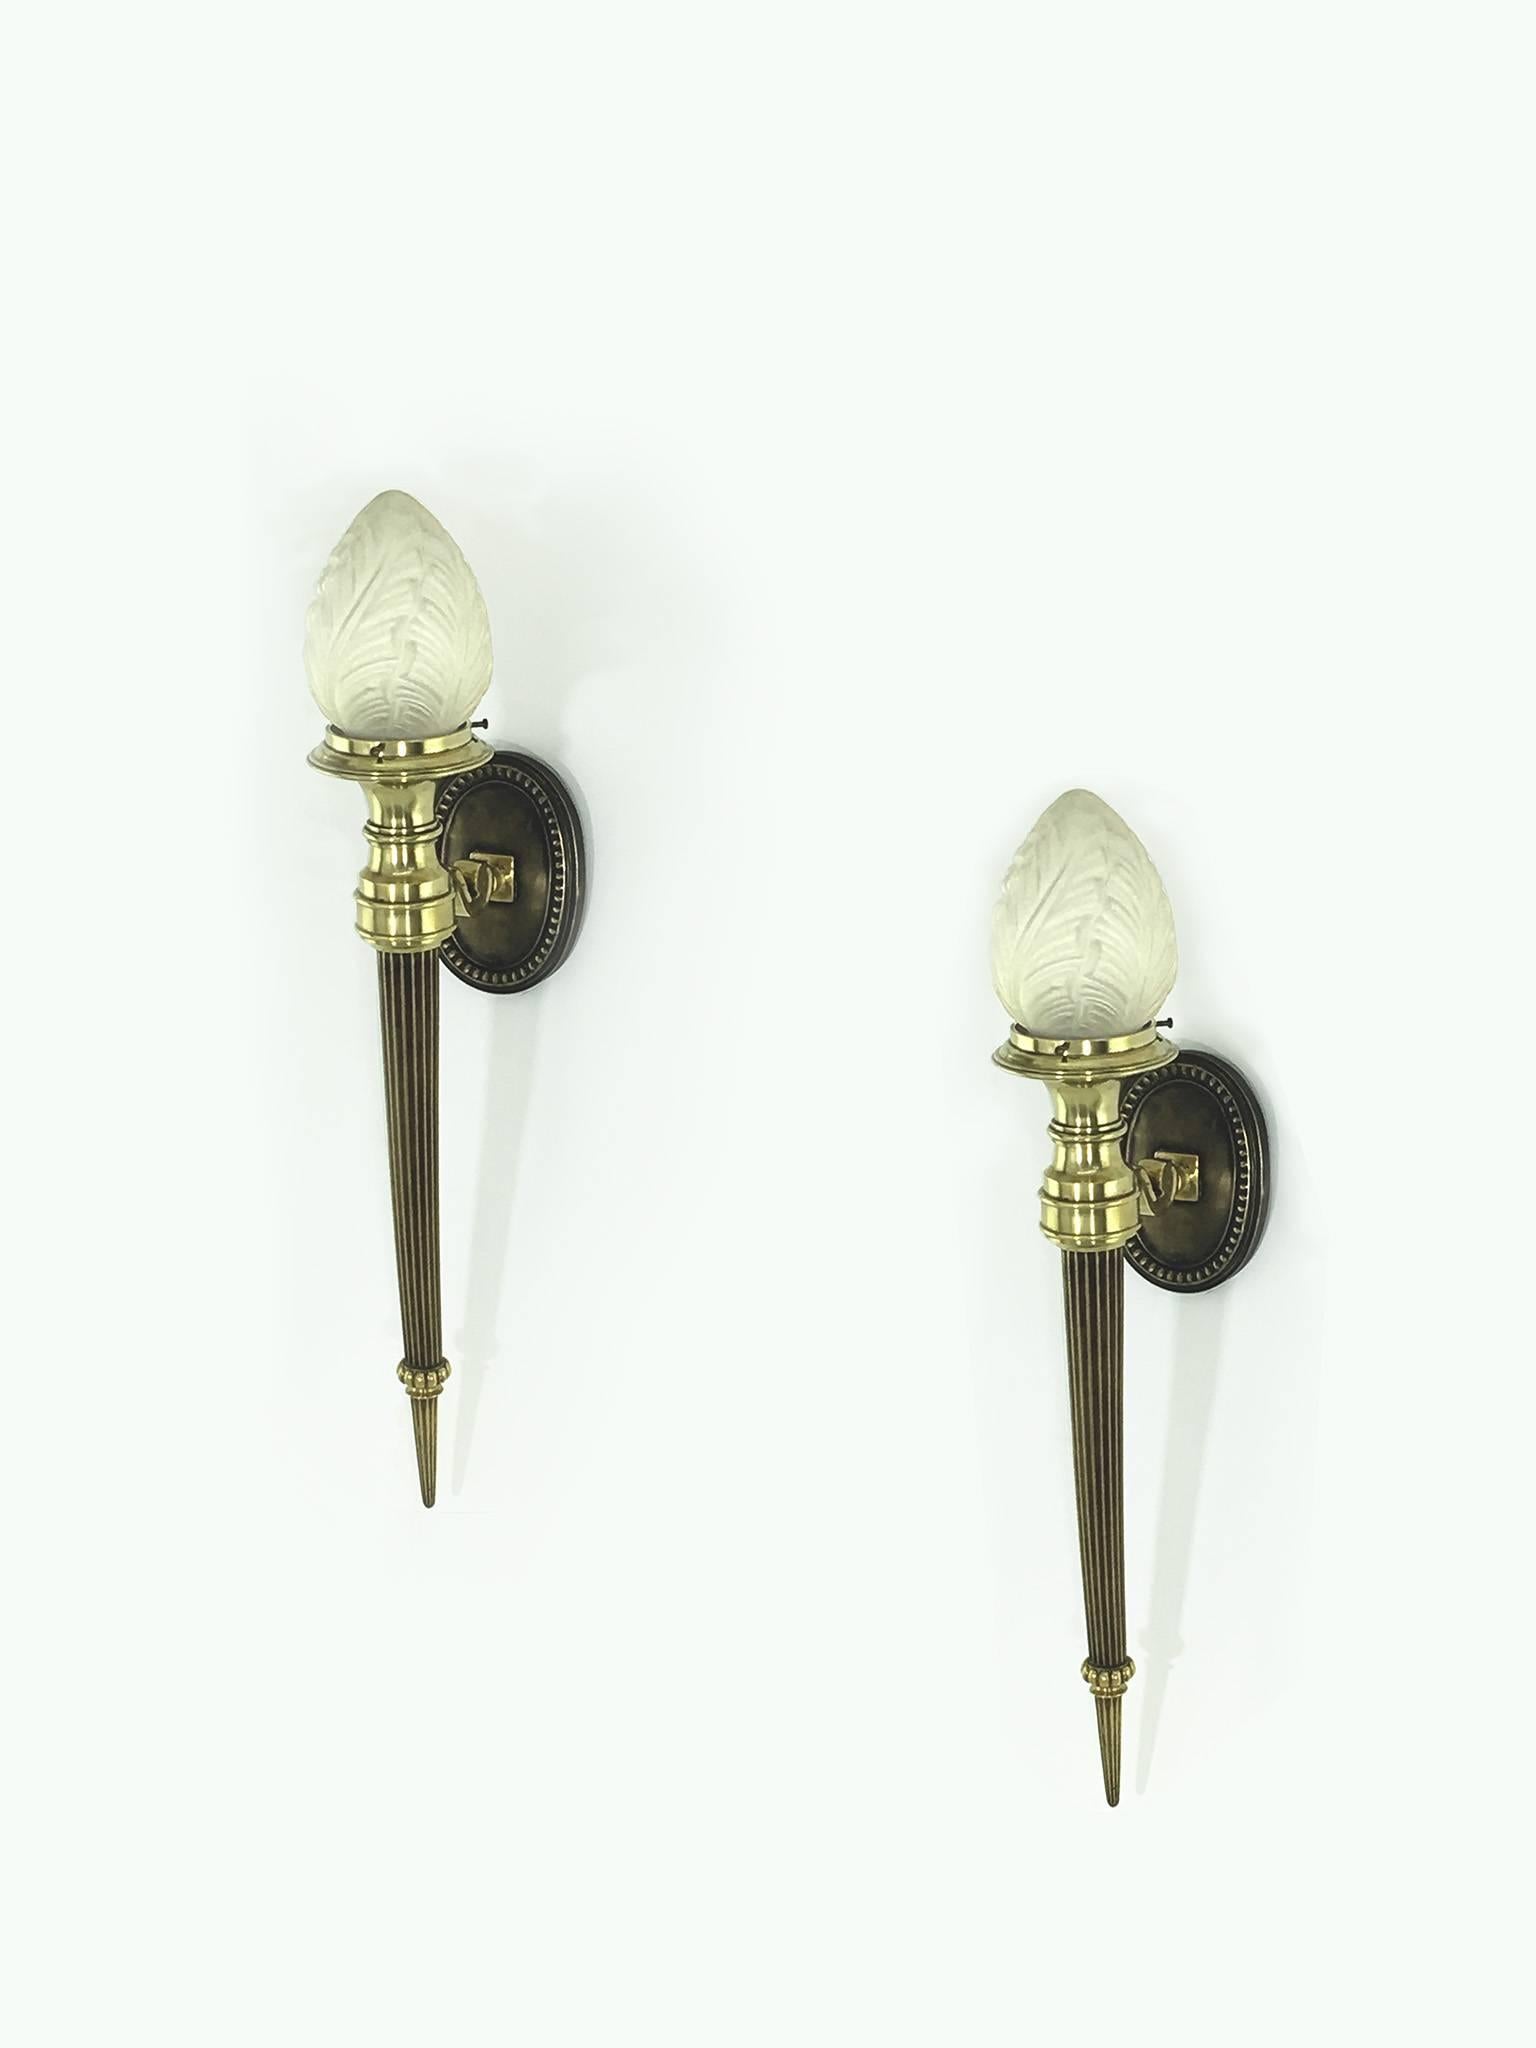 Pair of large high quality neoclassical wall sconces in the style of Rene Lalique or Gilbert Poillerat.
Art Deco Sconces